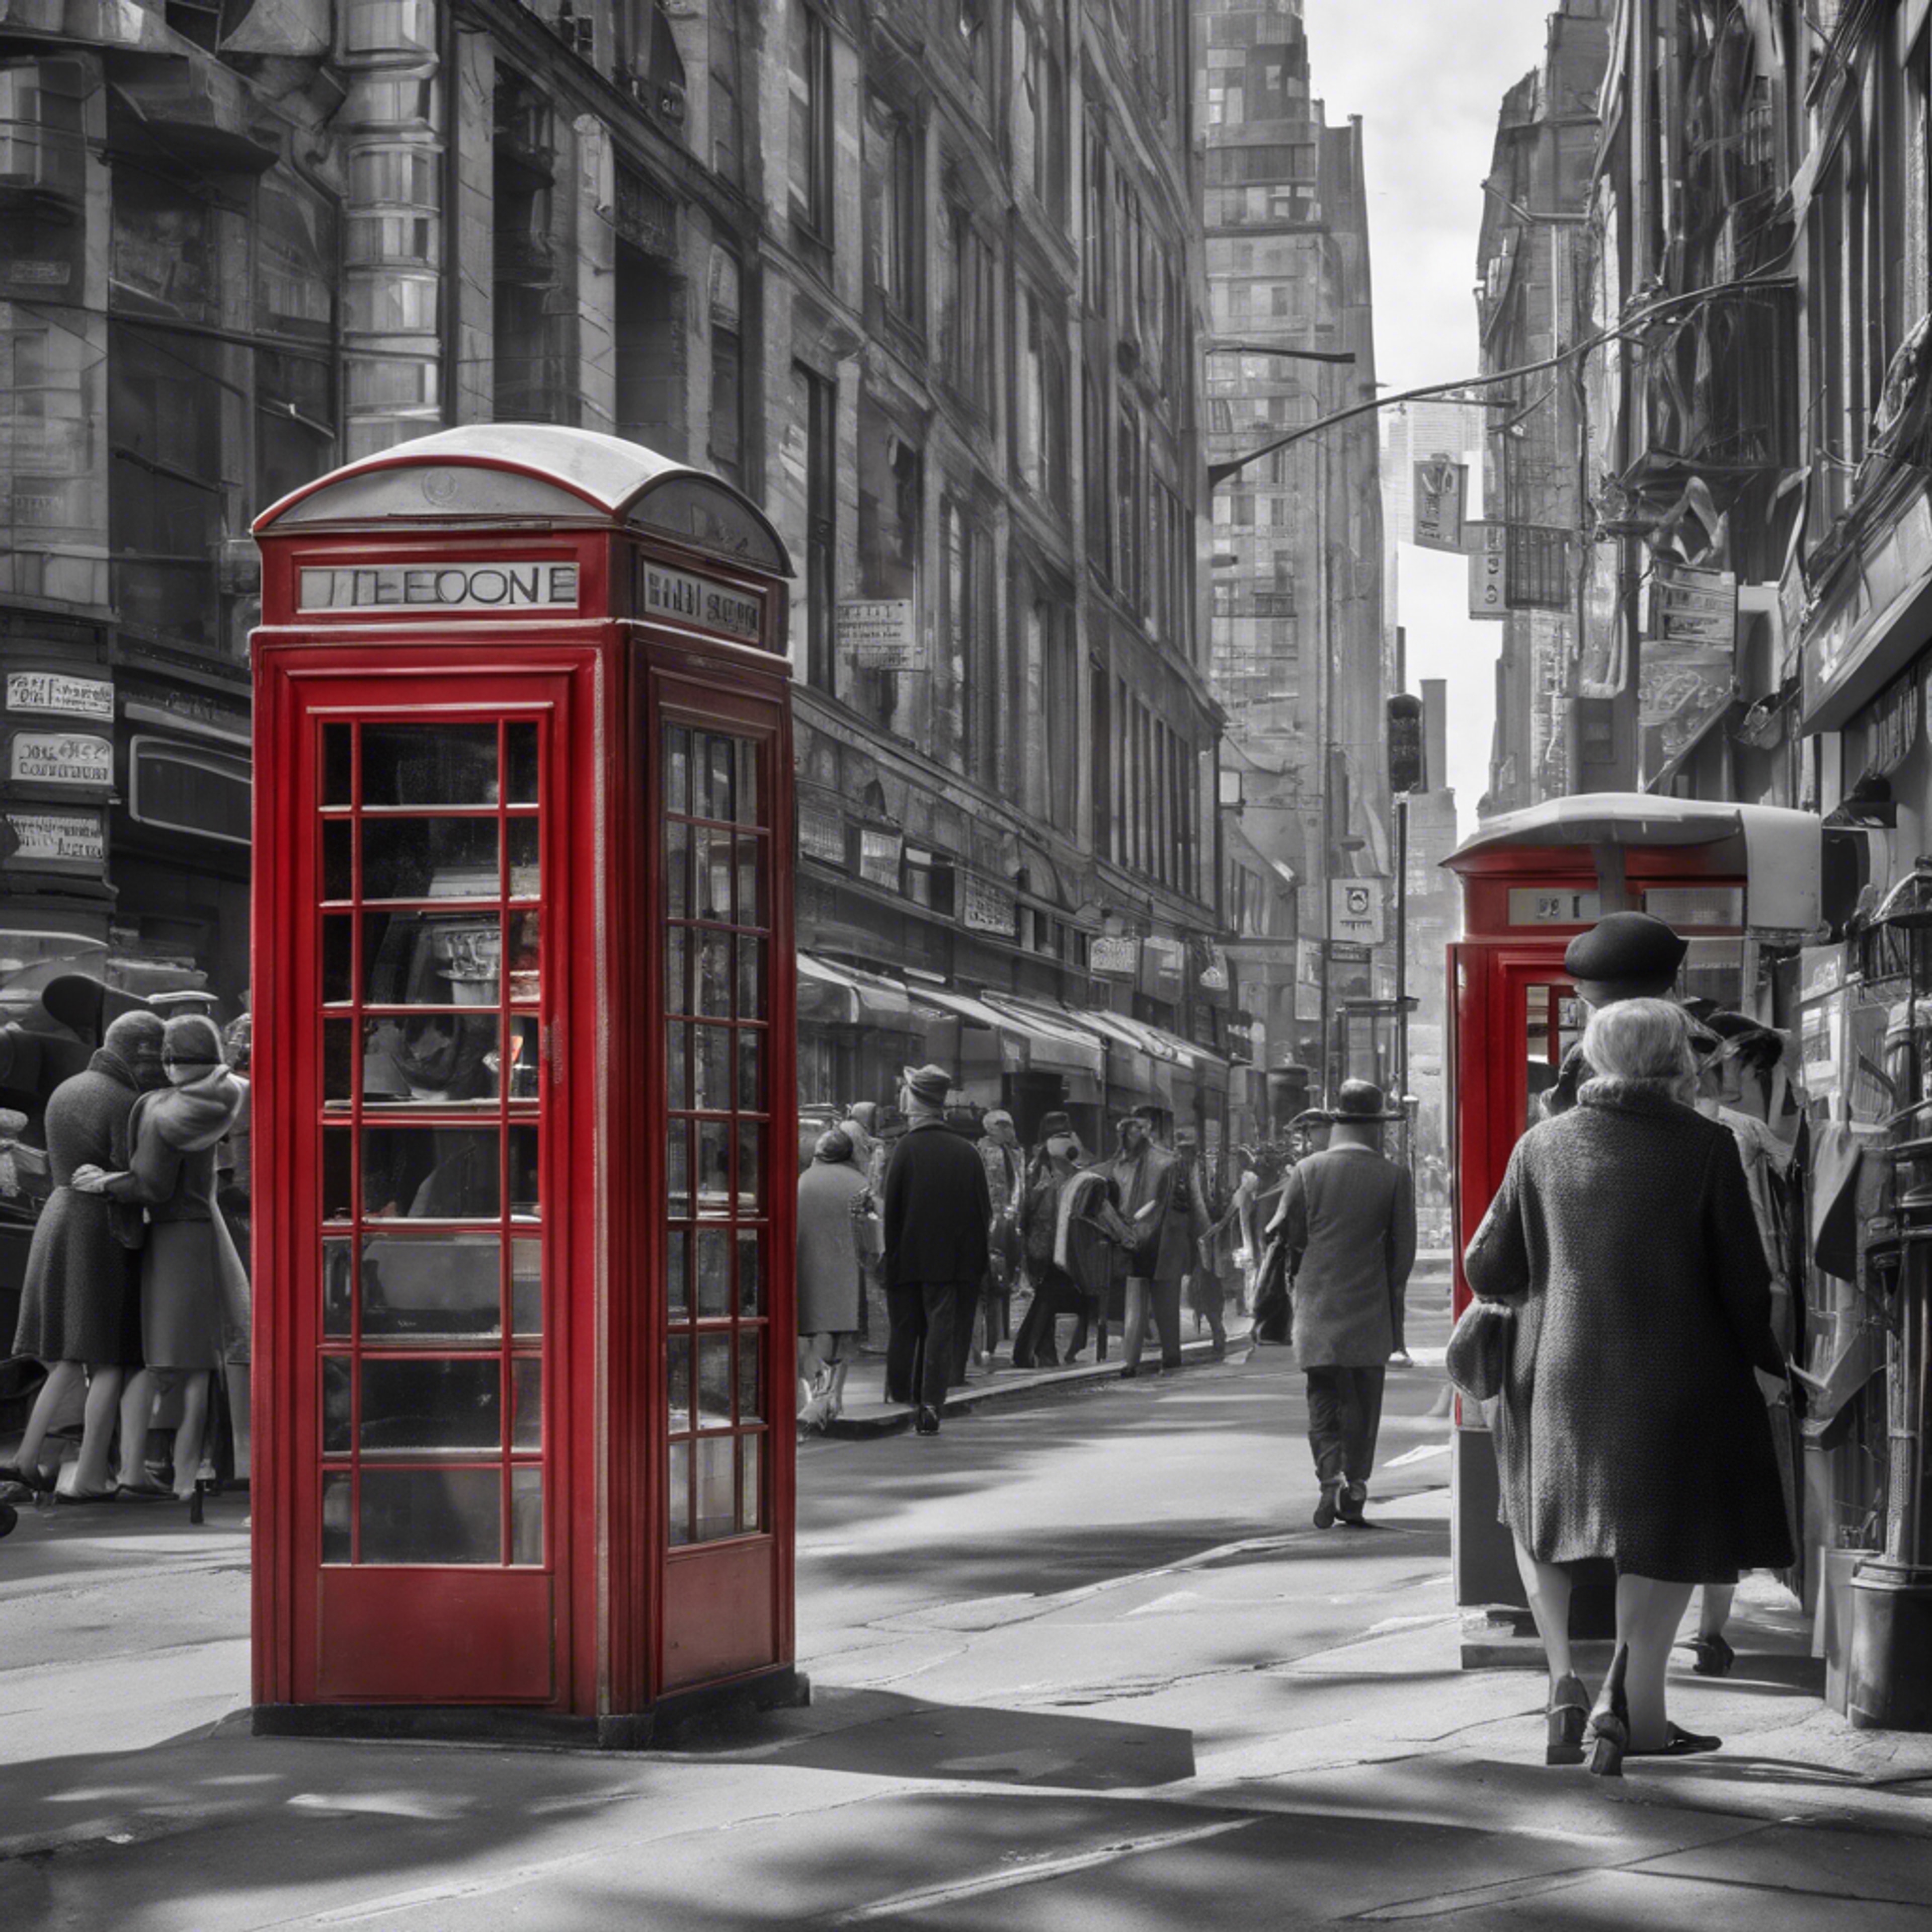 A black and white picture of a busy city street in the 1960s, with one characteristic iconic red phone booth. วอลล์เปเปอร์[8cad1b57085c4579b492]